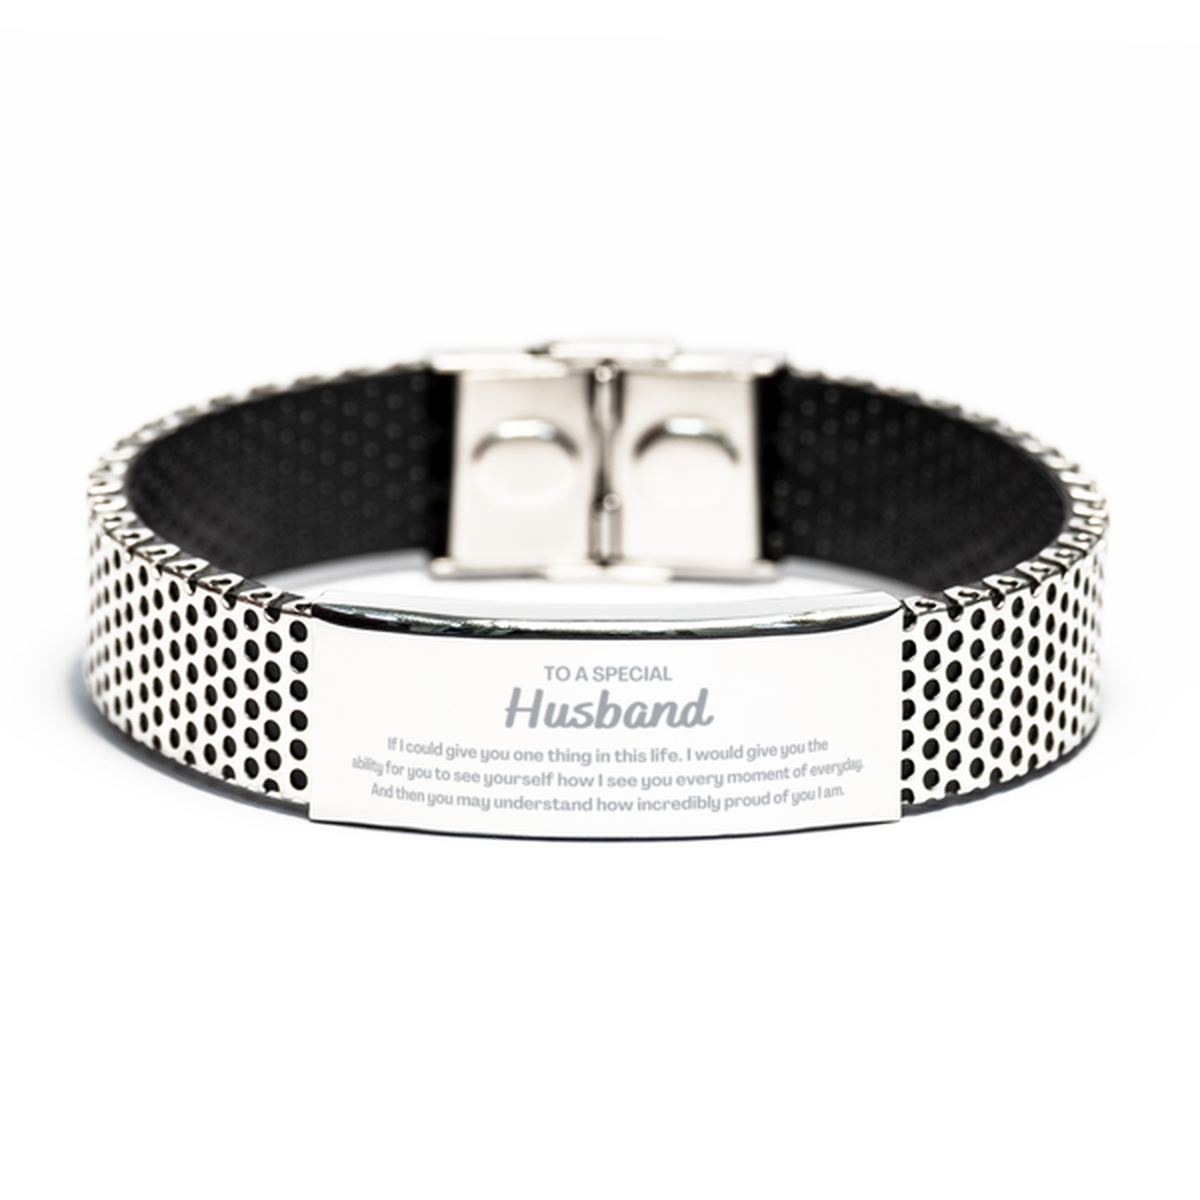 To My Husband Stainless Steel Bracelet, Gifts For Husband Engraved, Inspirational Gifts for Christmas Birthday, Epic Gifts for Husband To A Special Husband how incredibly proud of you I am